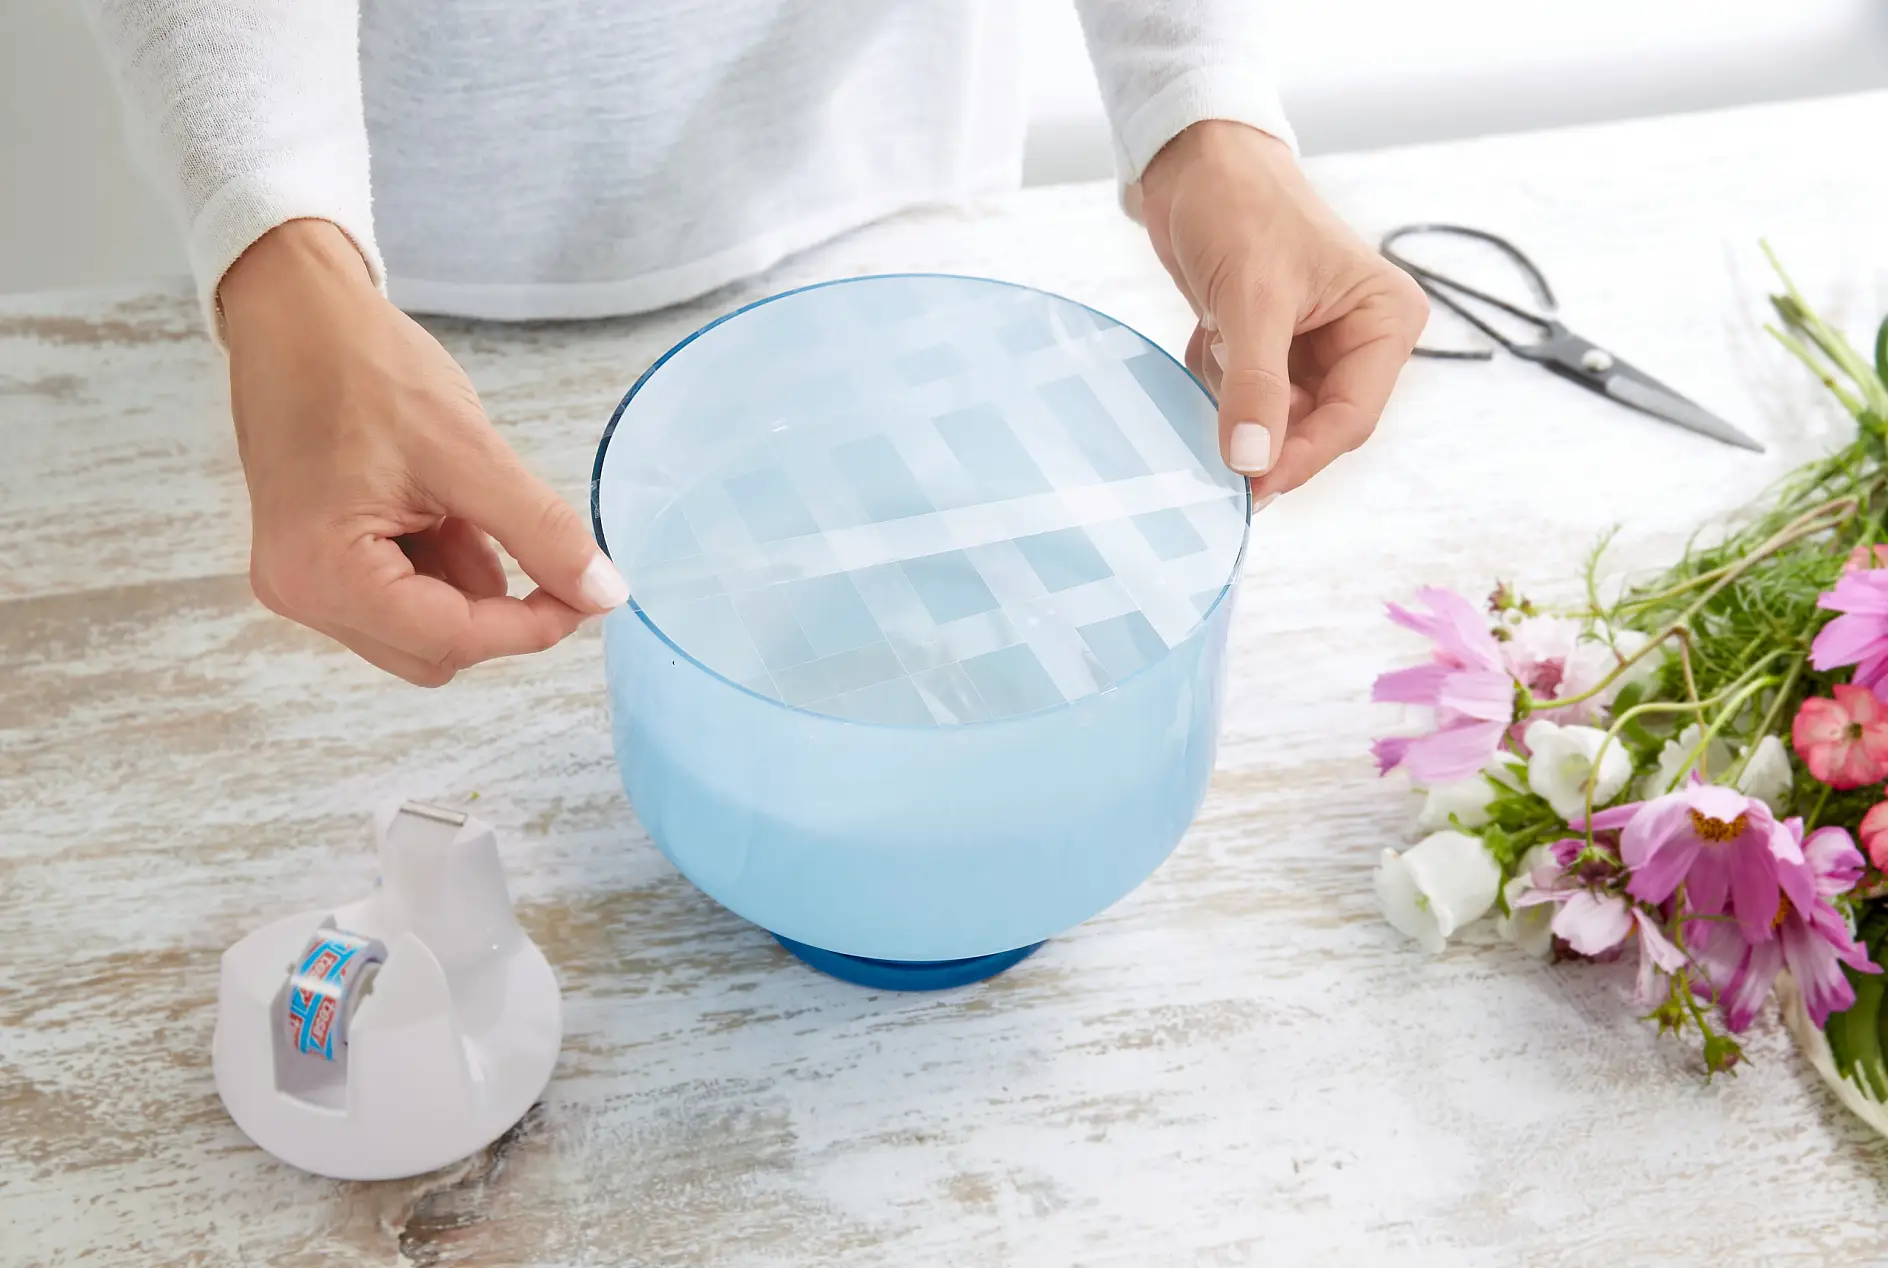 To arrange flowers in vases or bowls with wide openings, and to avoid them slipping to the side, there is a simple trick: Using tesafilm®, tape a grid on across the vase mouth, at a distance of approx. 2 cm.